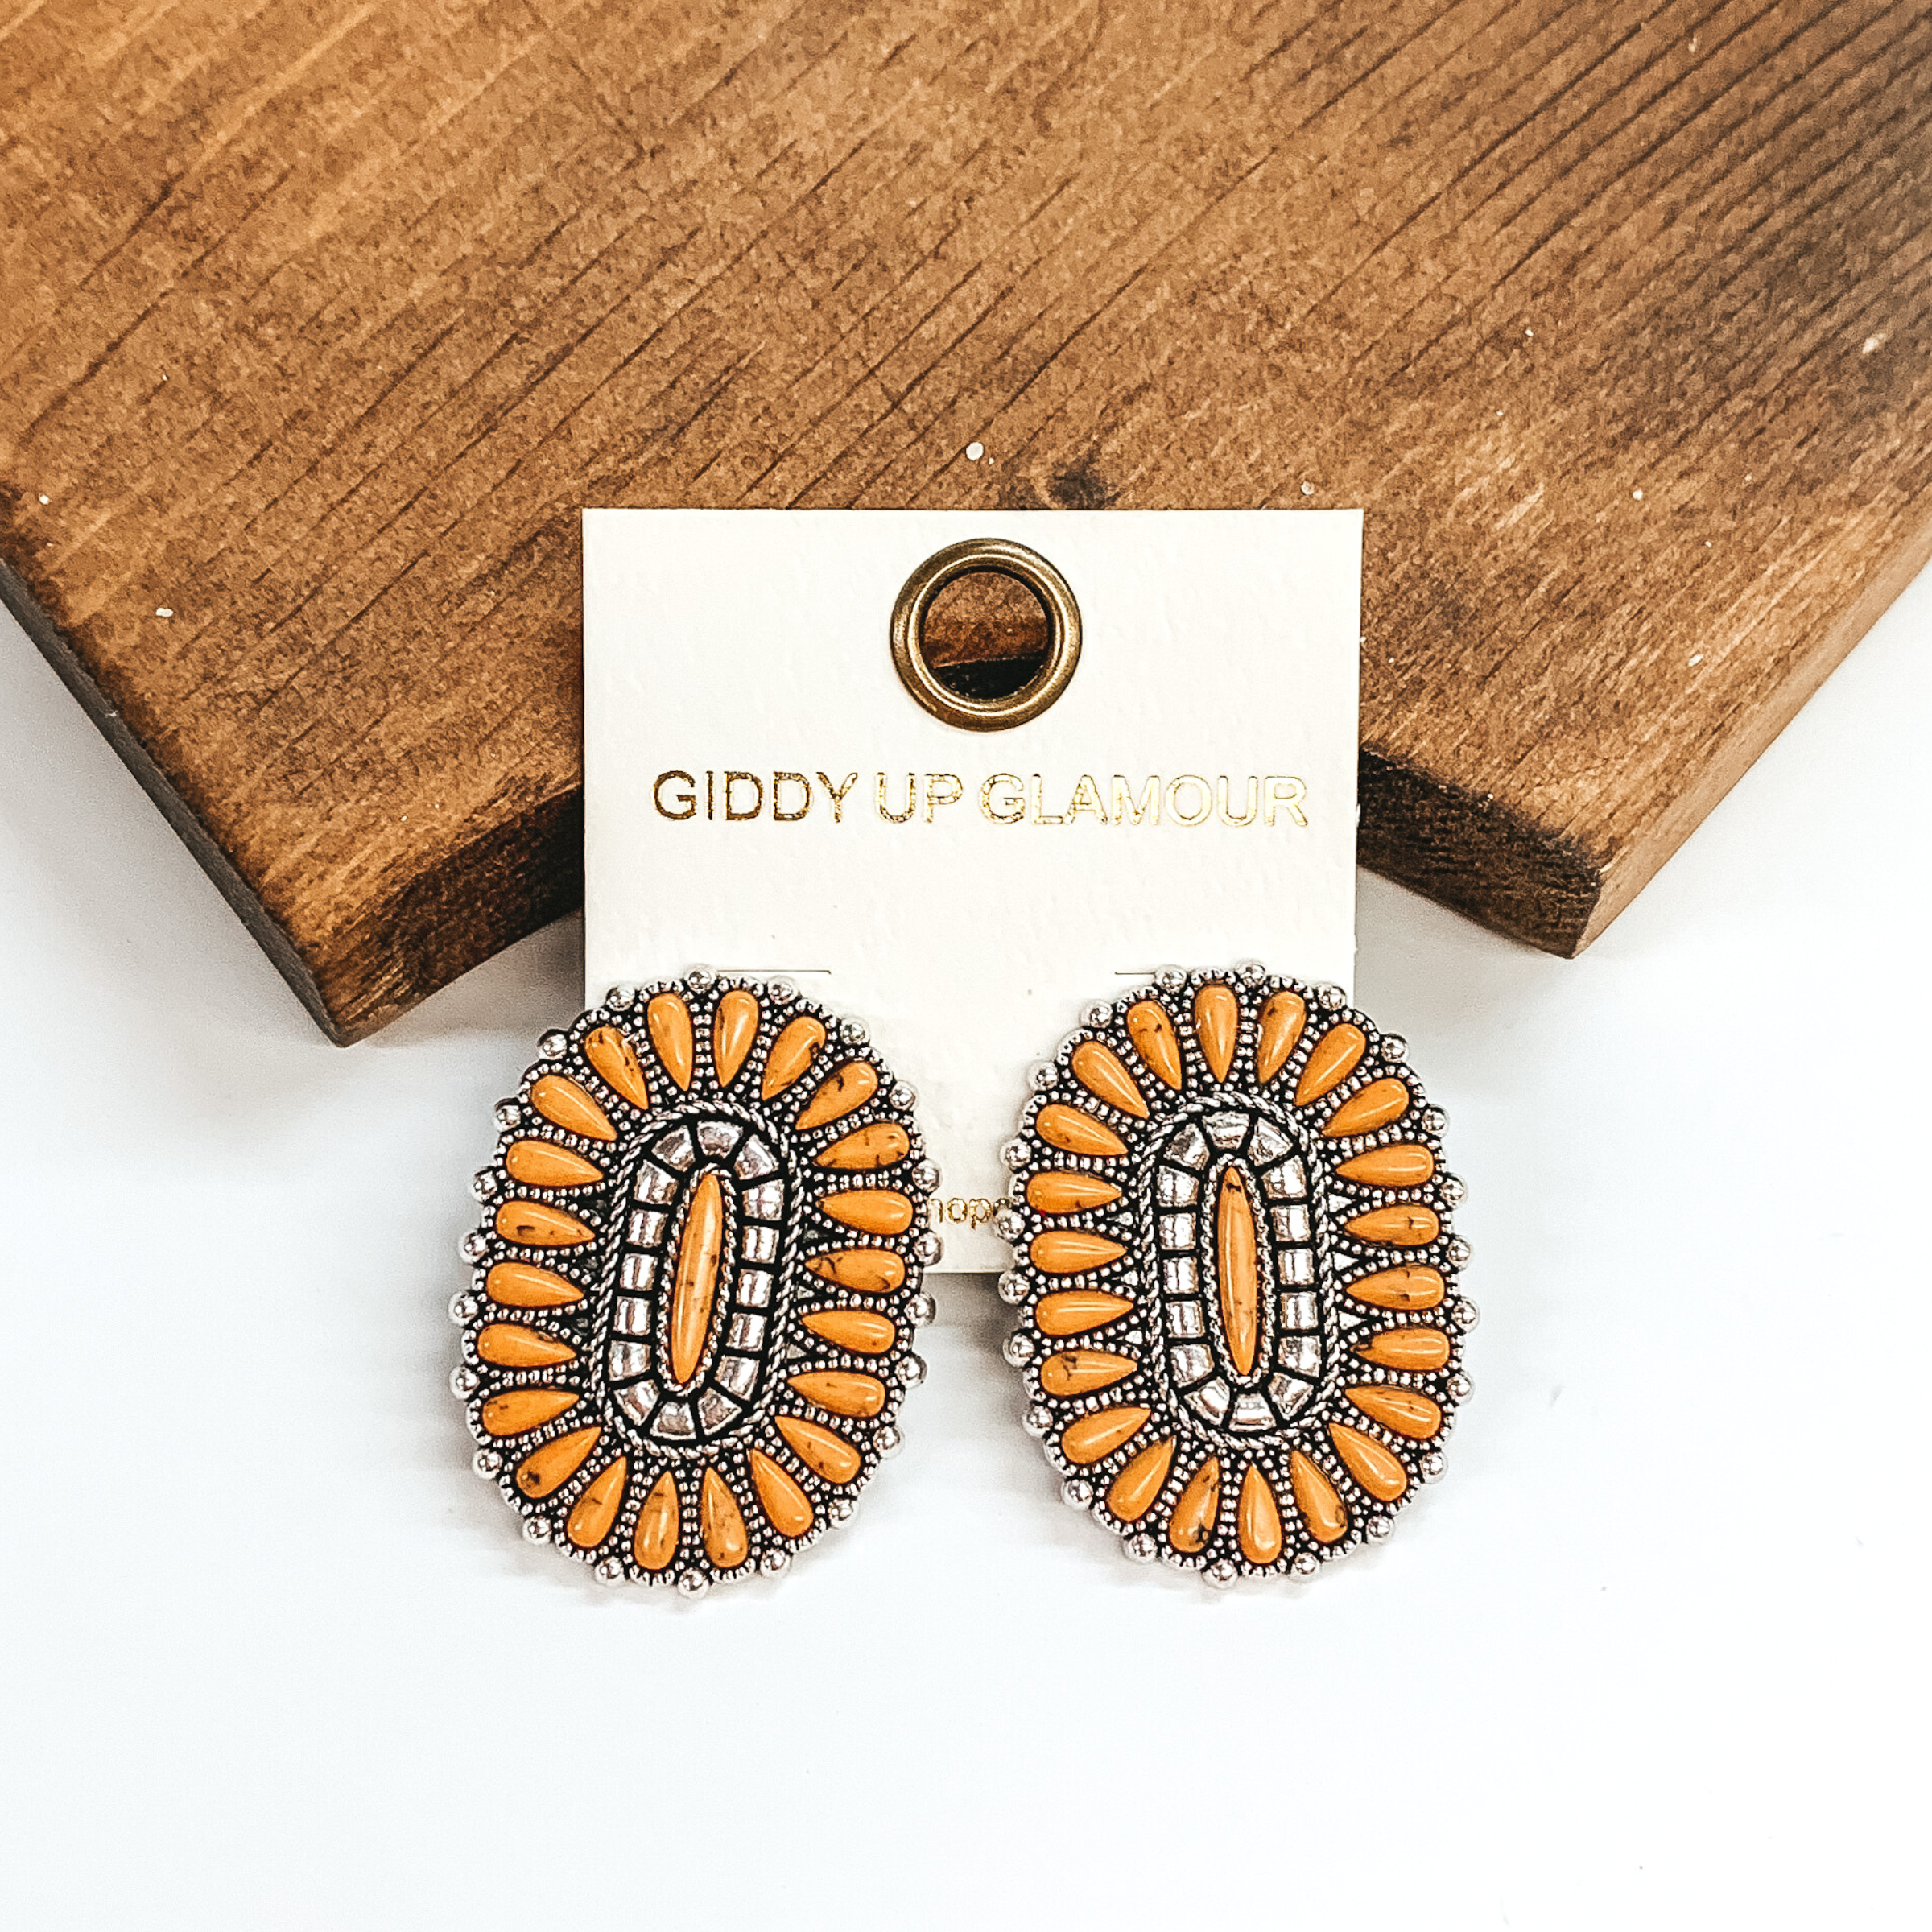 Mustard yellow stone cluster earrings in an oval shape. These earrings are pictured leaning against a brown block on a white background.